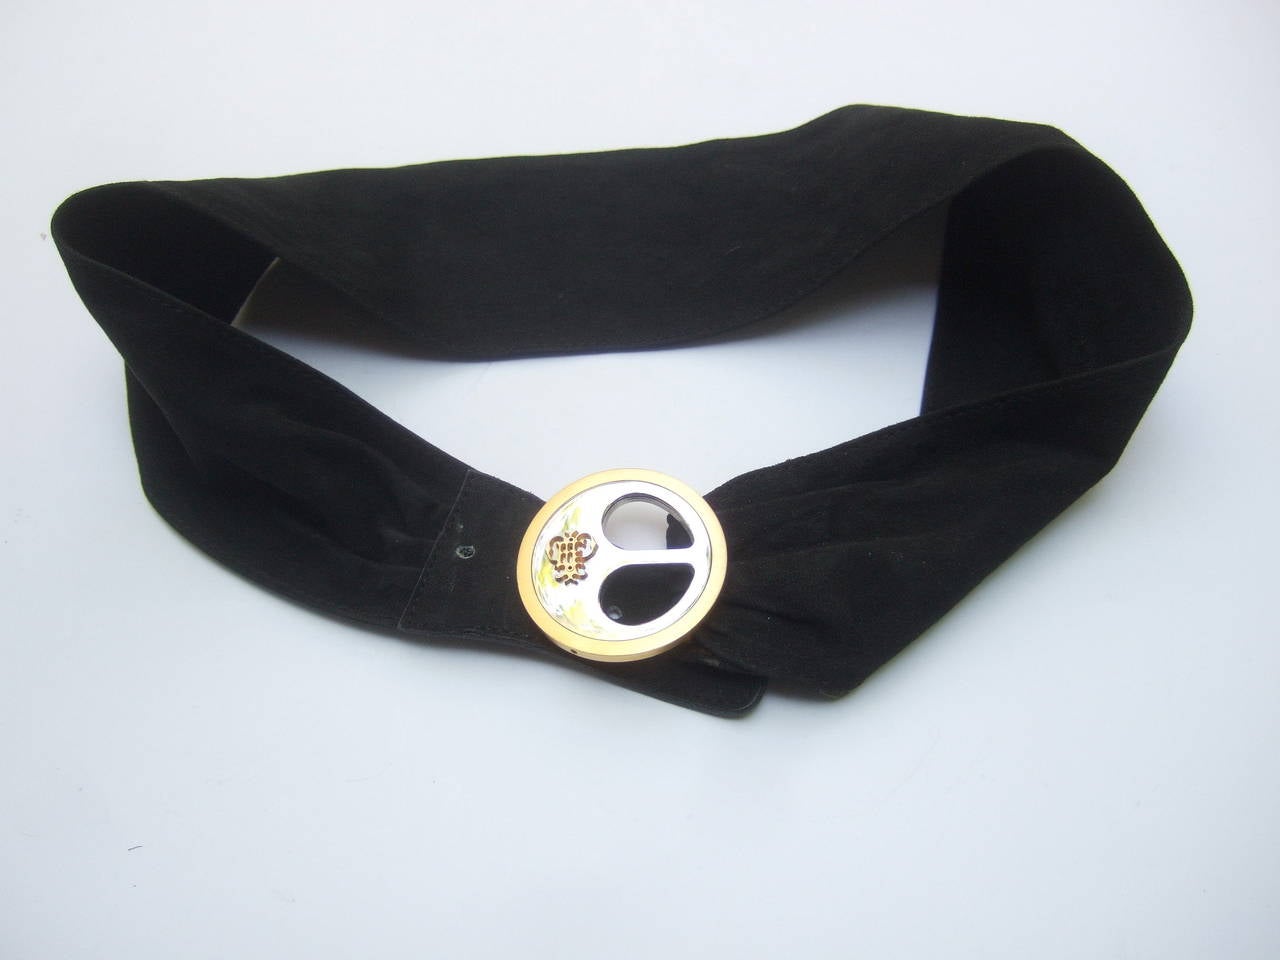 Emilio Pucci Black Suede Strap Belt Made in Italy c 1970s For Sale 1